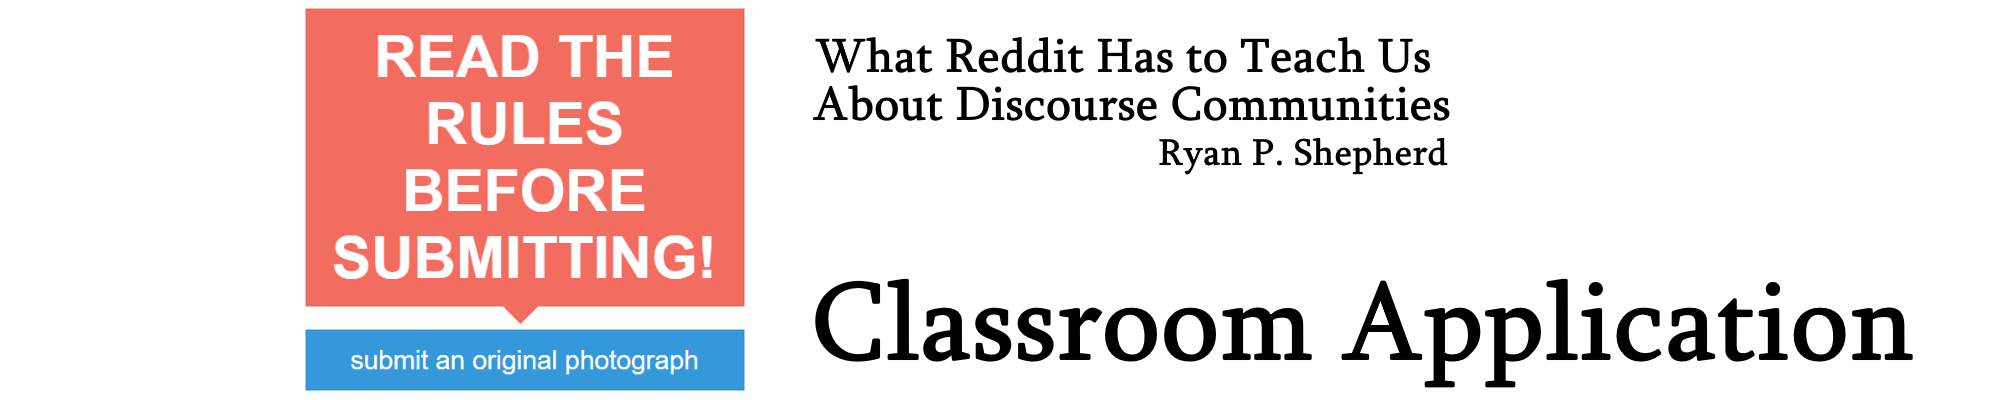 Banner Reads What Reddit Has to Teach Us About Discourse Communities and Classroom Application